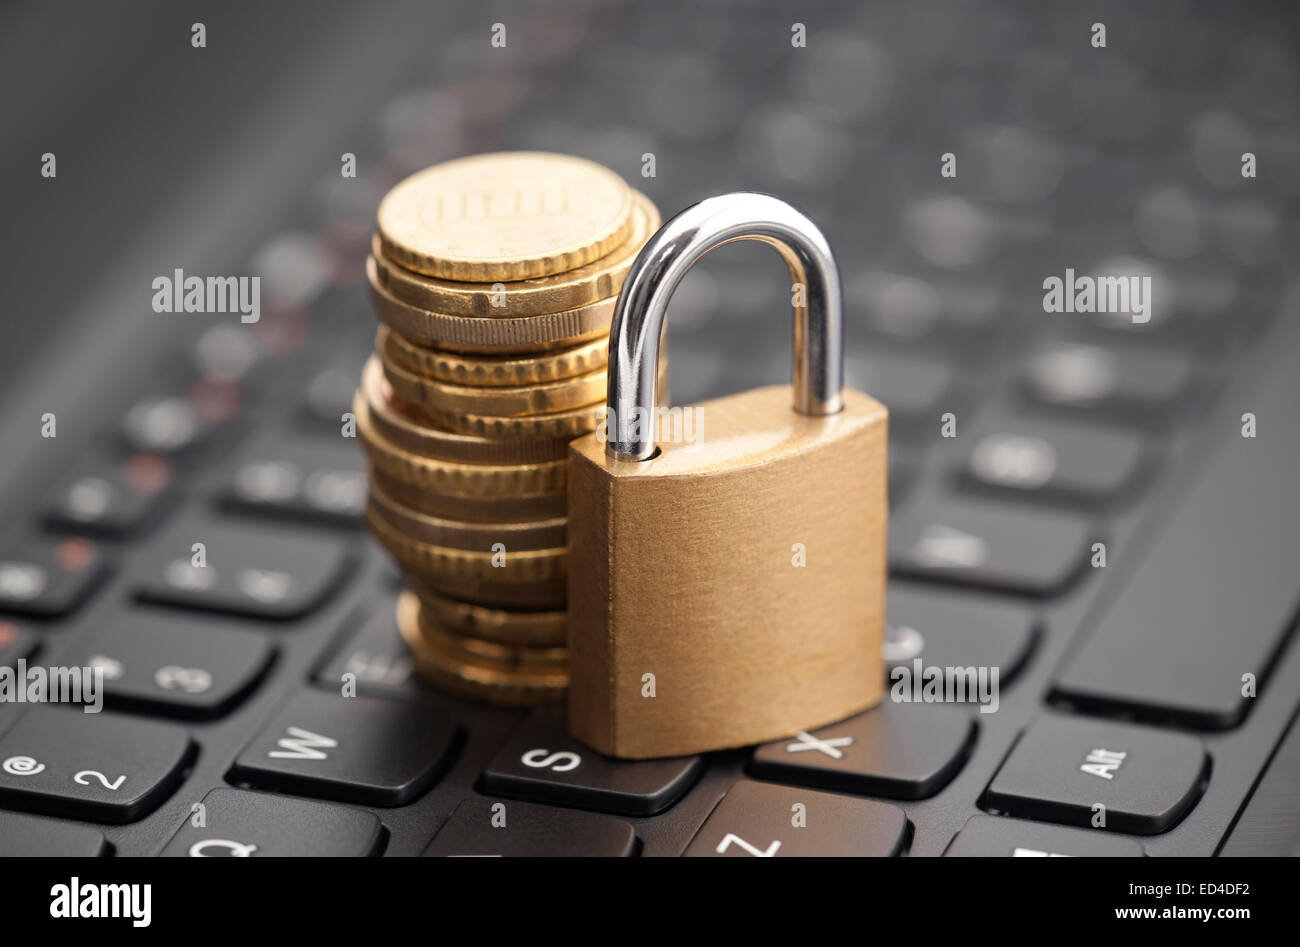 Padlock and coins on laptop keyboard Stock Photo